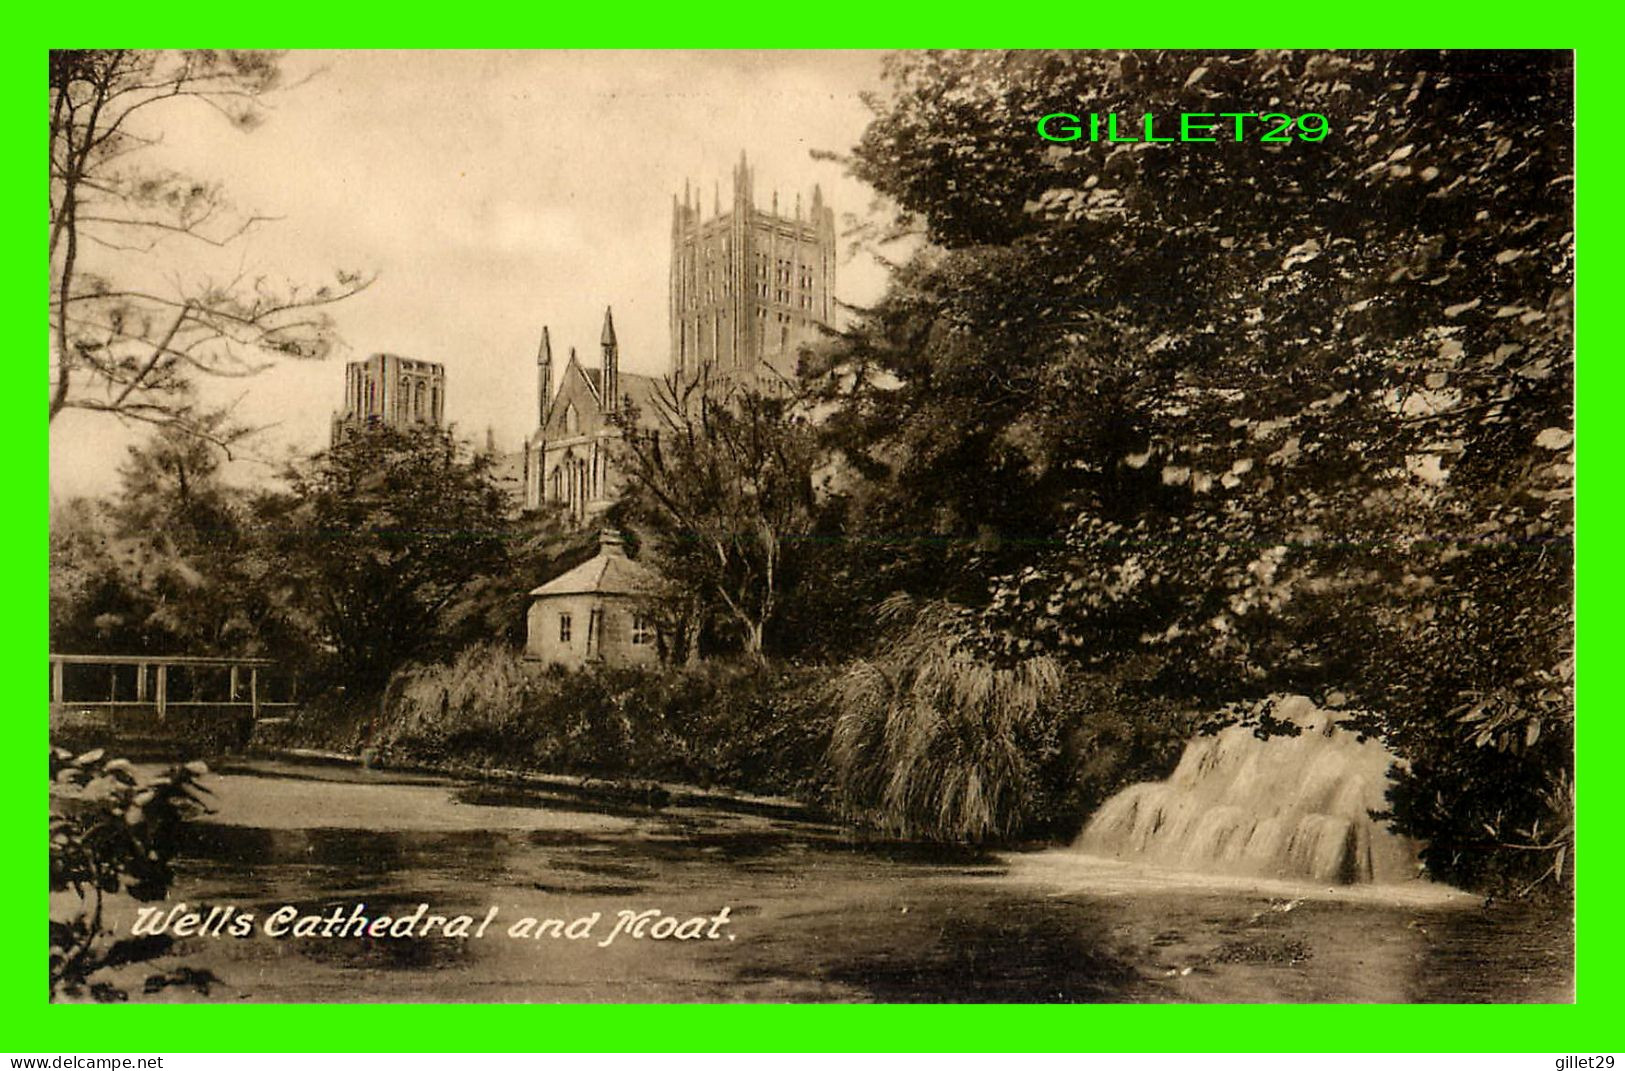 WELLS, SOMERSET, UK - WELLS CATHEDRAL AND MOAT -  PUB. BY T. W. PHILLIPS - - Wells